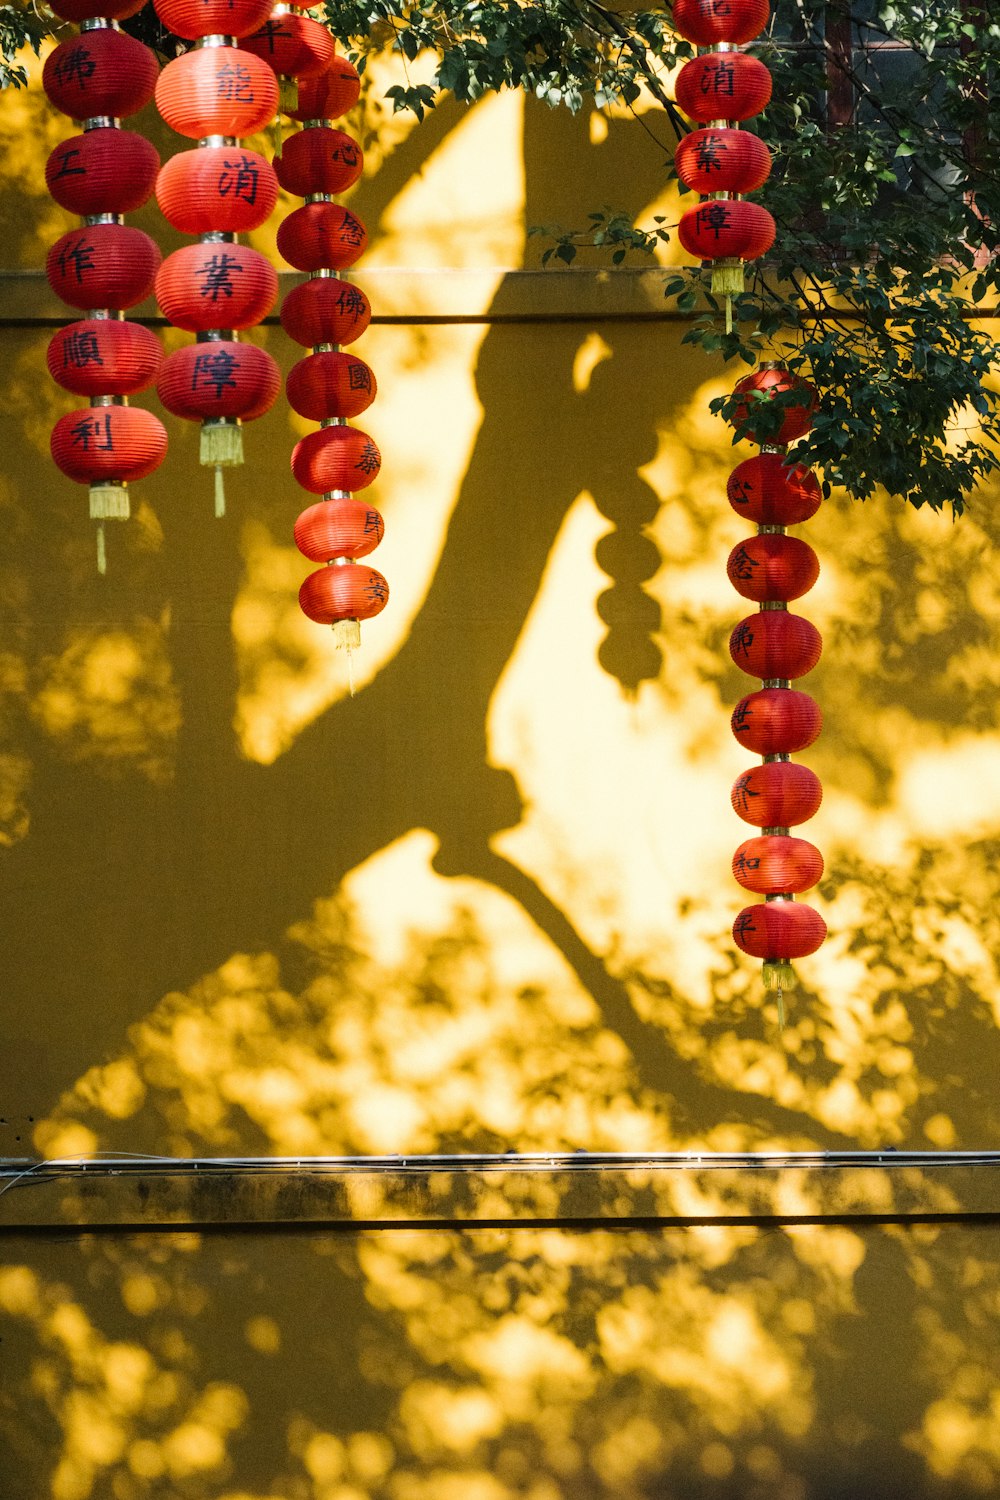 a shadow of a person holding a red lantern